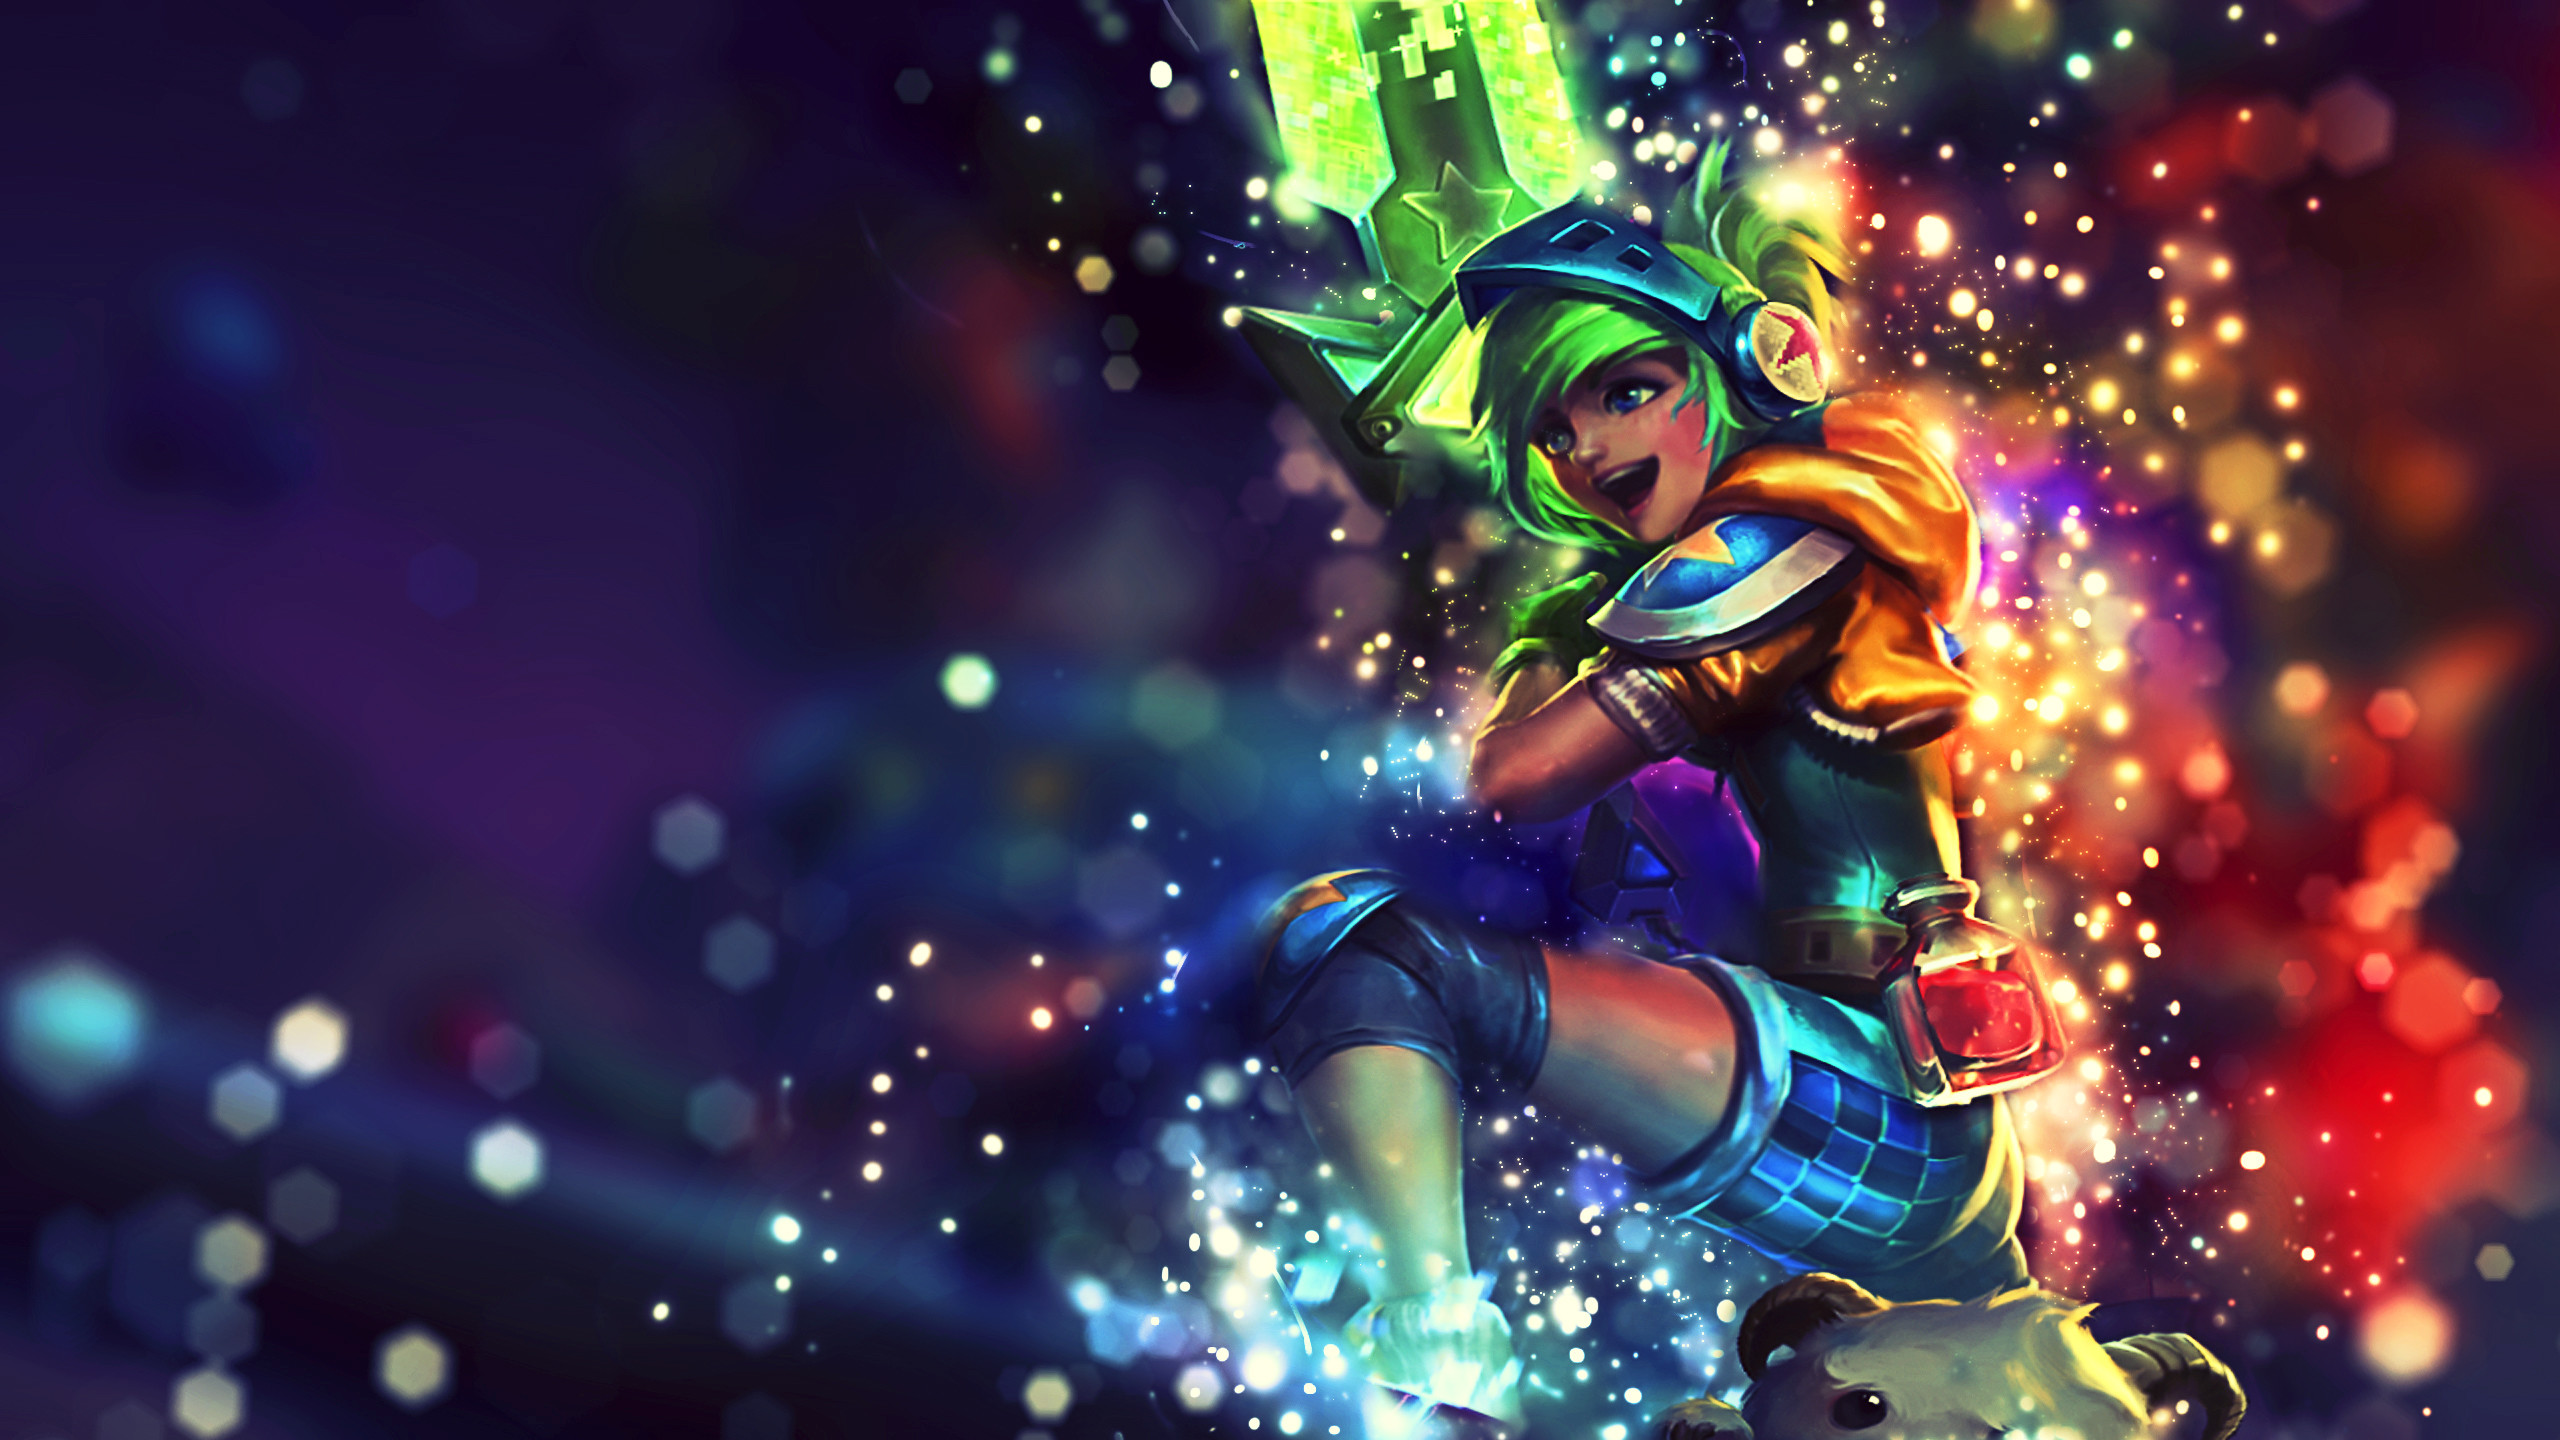 arcade riven wallpaper,animation,graphic design,tree,fictional character,space